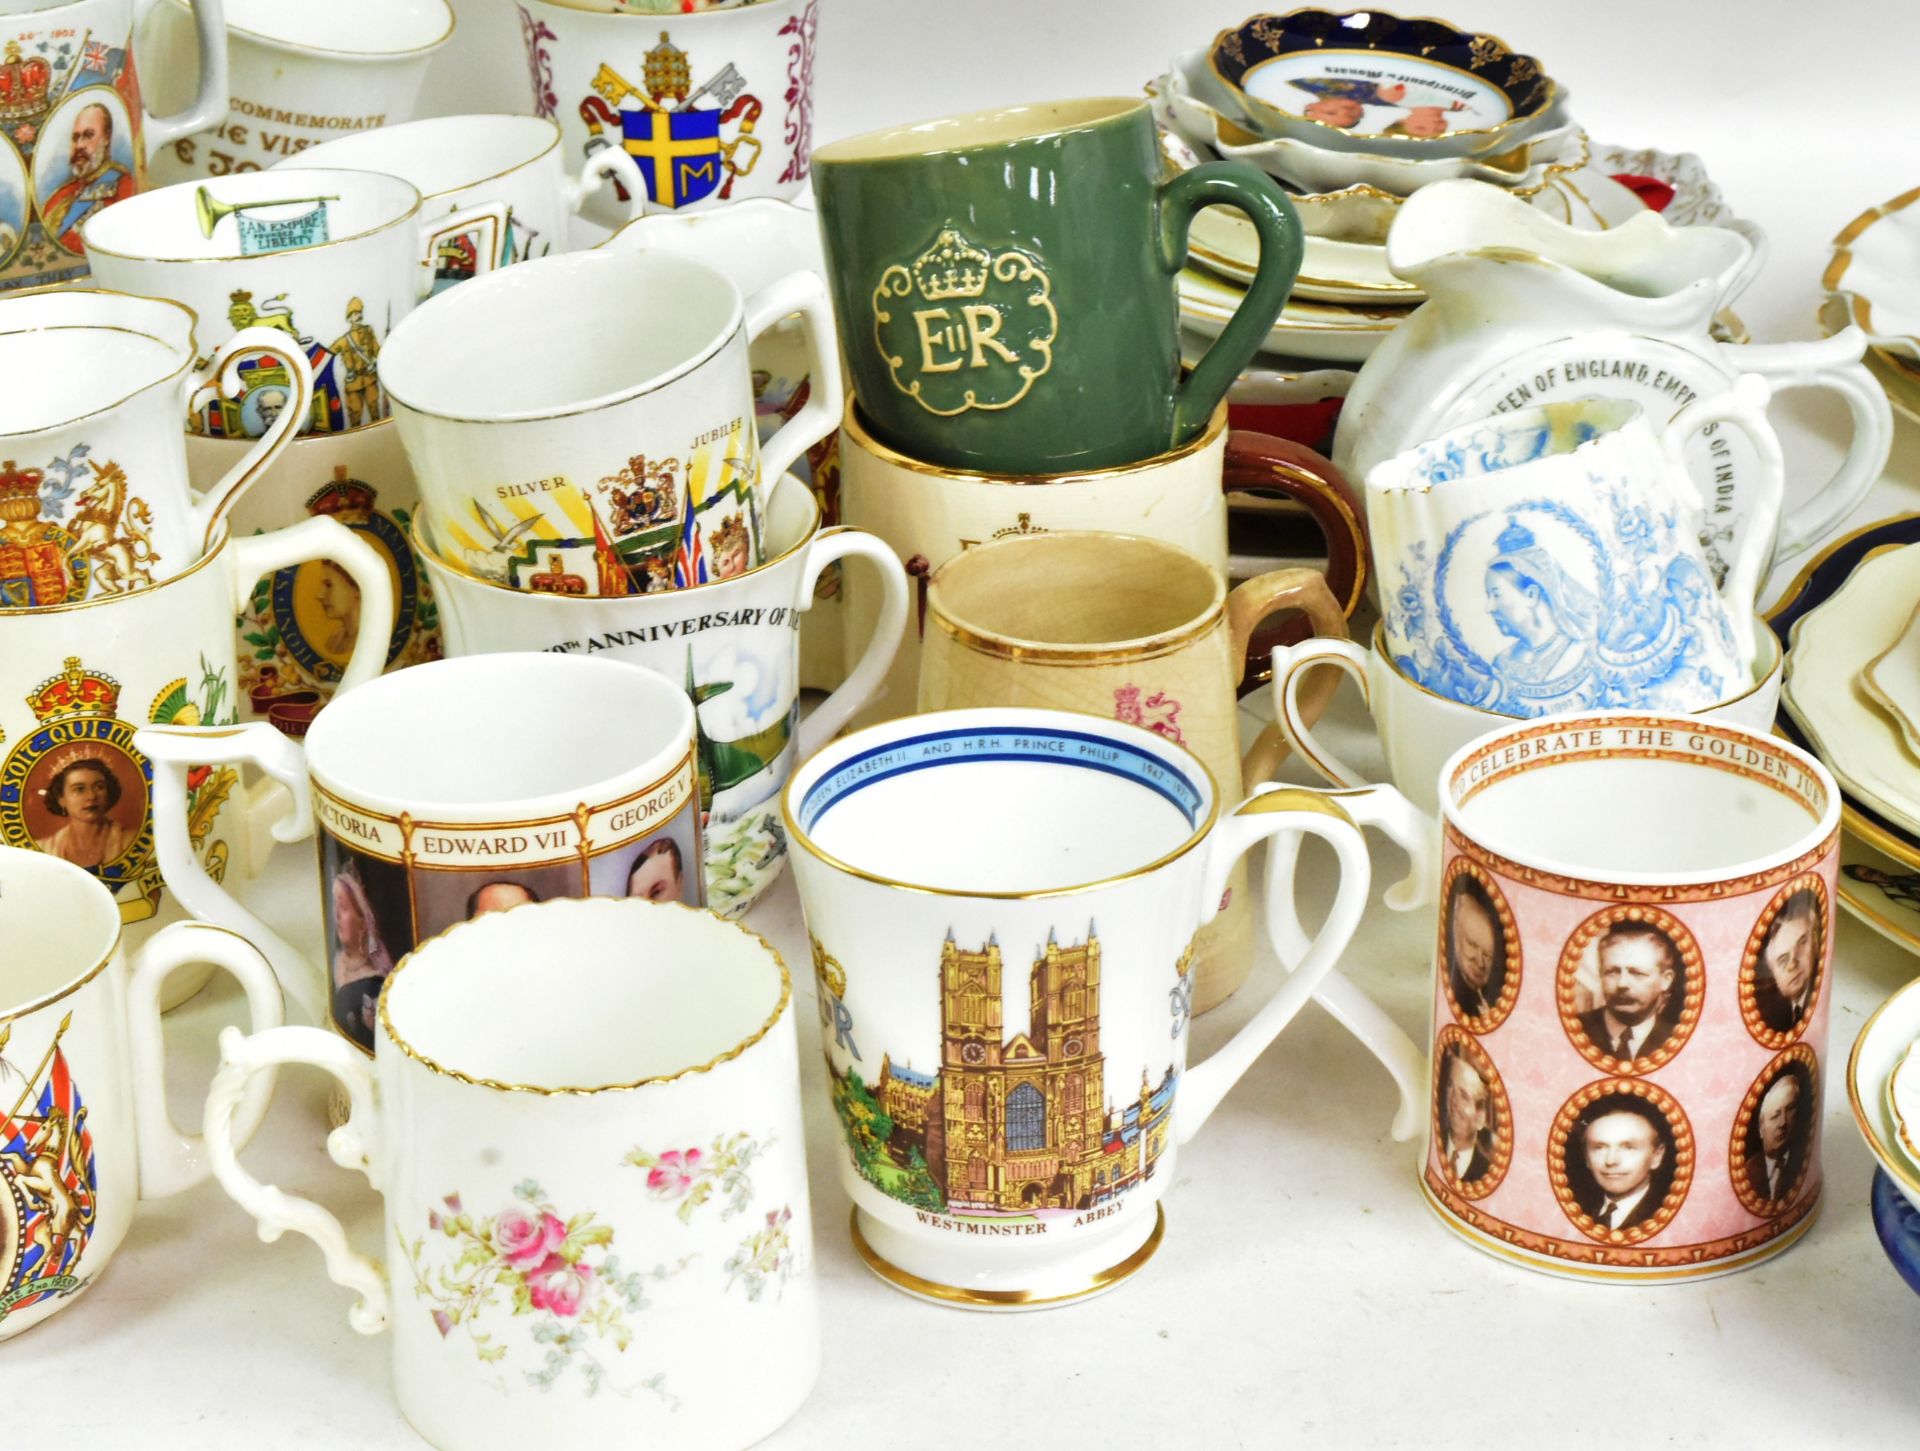 LARGE COLLECTION OF ROYAL COMMEMORATIVE MUGS & PLATES - Image 3 of 5